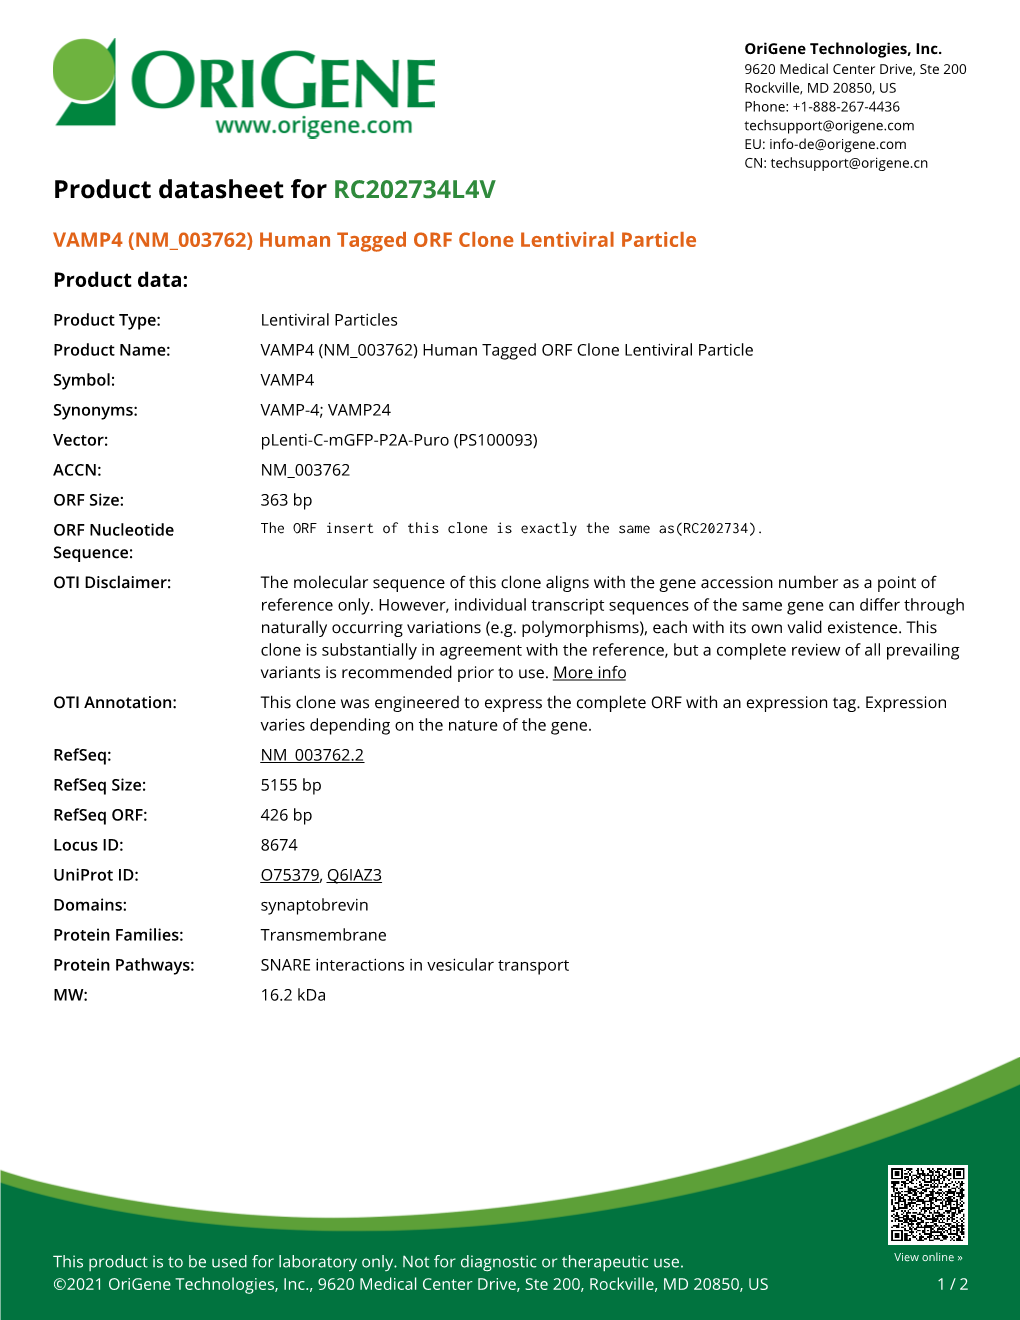 VAMP4 (NM 003762) Human Tagged ORF Clone Lentiviral Particle Product Data